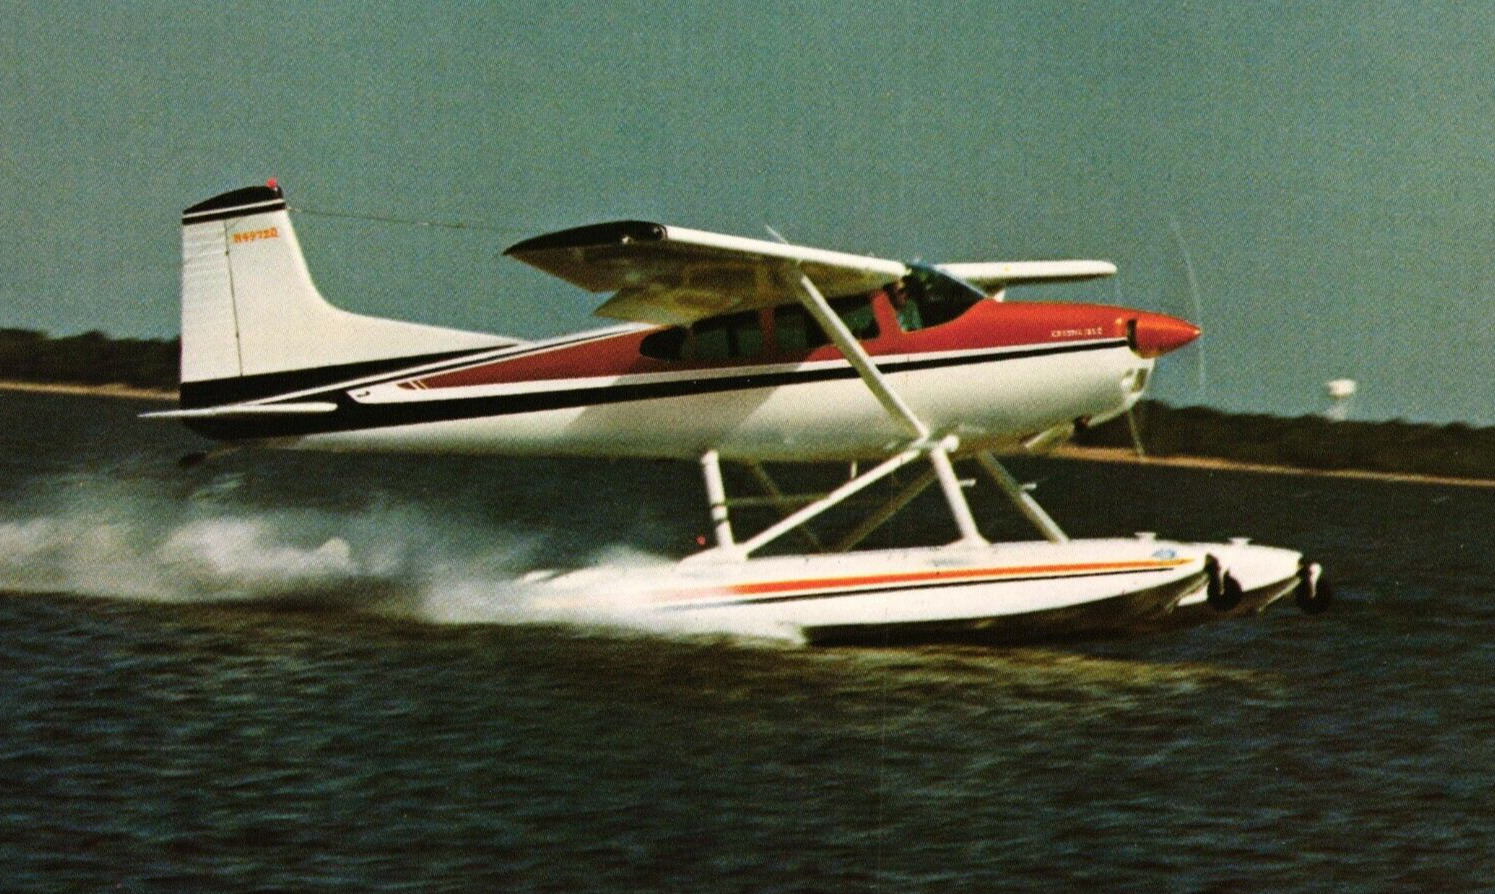 1979 Cessna 185 Airplane With Water Skis 155 Knots Max Unposted Vintage Postcard